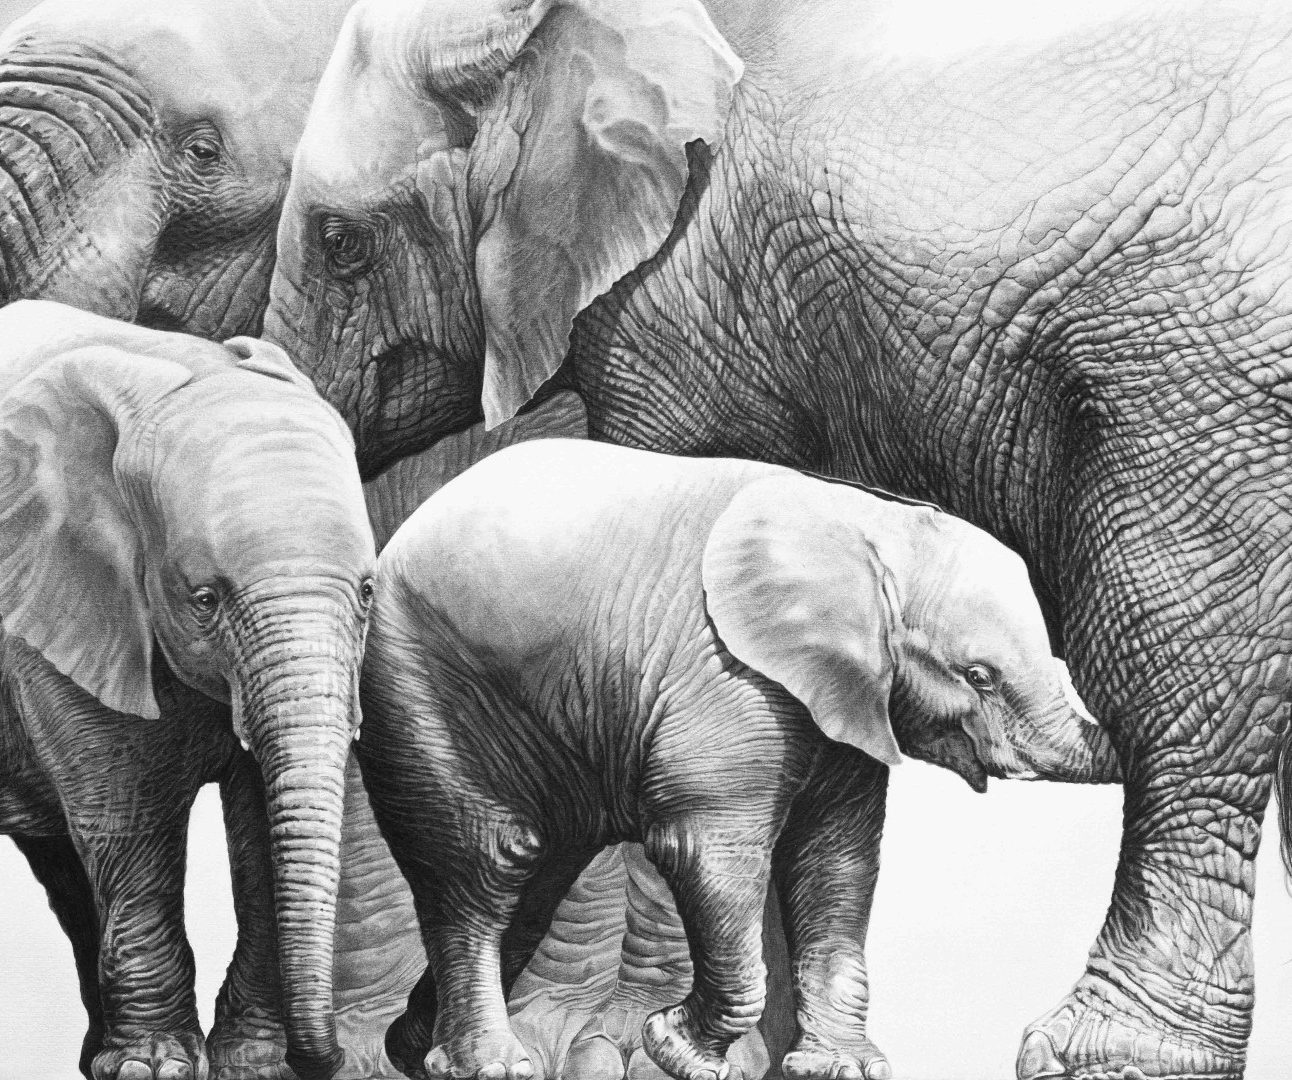 A pencil sketch of a group of African elephants and calves